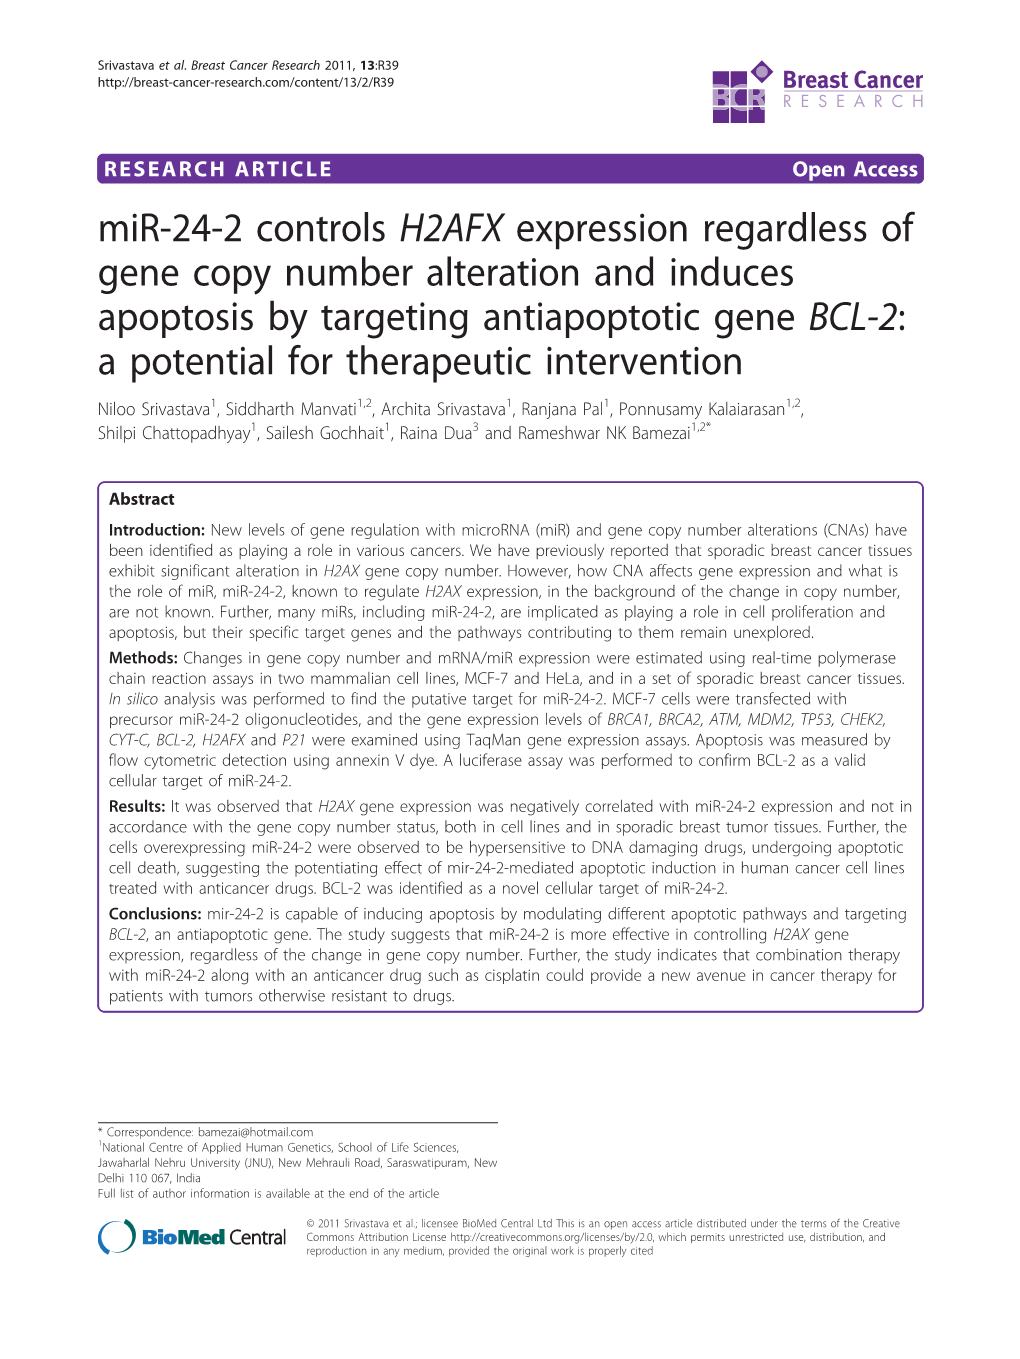 Mir-24-2 Controls H2AFX Expression Regardless of Gene Copy Number Alteration and Induces Apoptosis by Targeting Antiapoptotic Ge